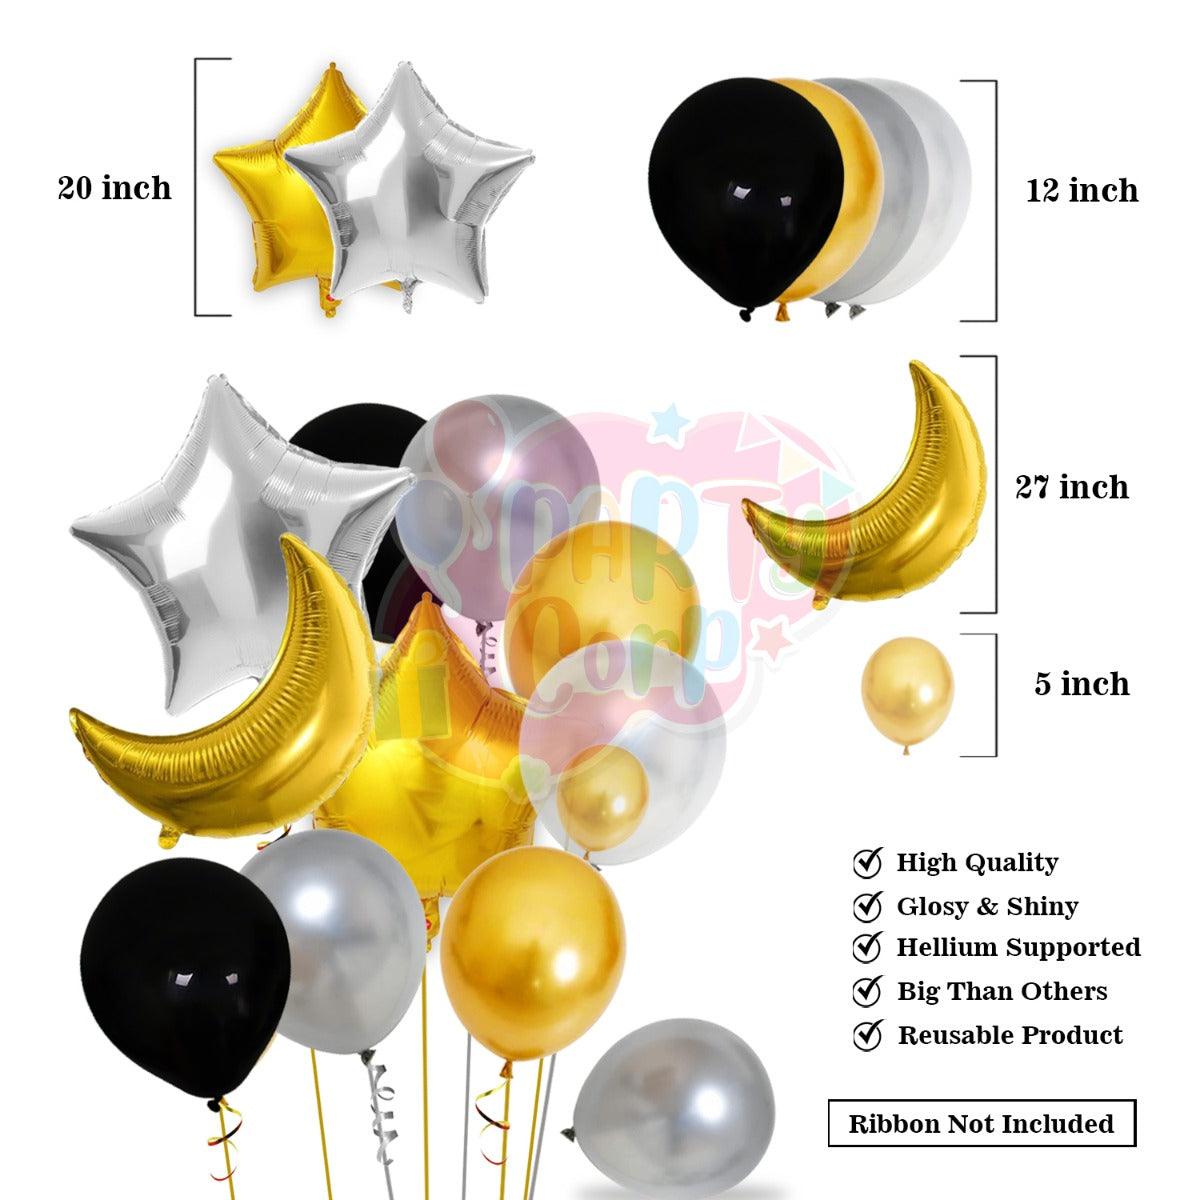 PartyCorp Happy Birthday Decoration Kit Combo 84 Pcs - Gold, Black & Silver Chrome Balloons, Black & Gold Happy Birthday Printed Banner, Gold Curtain, Moon & Star Foil Balloon